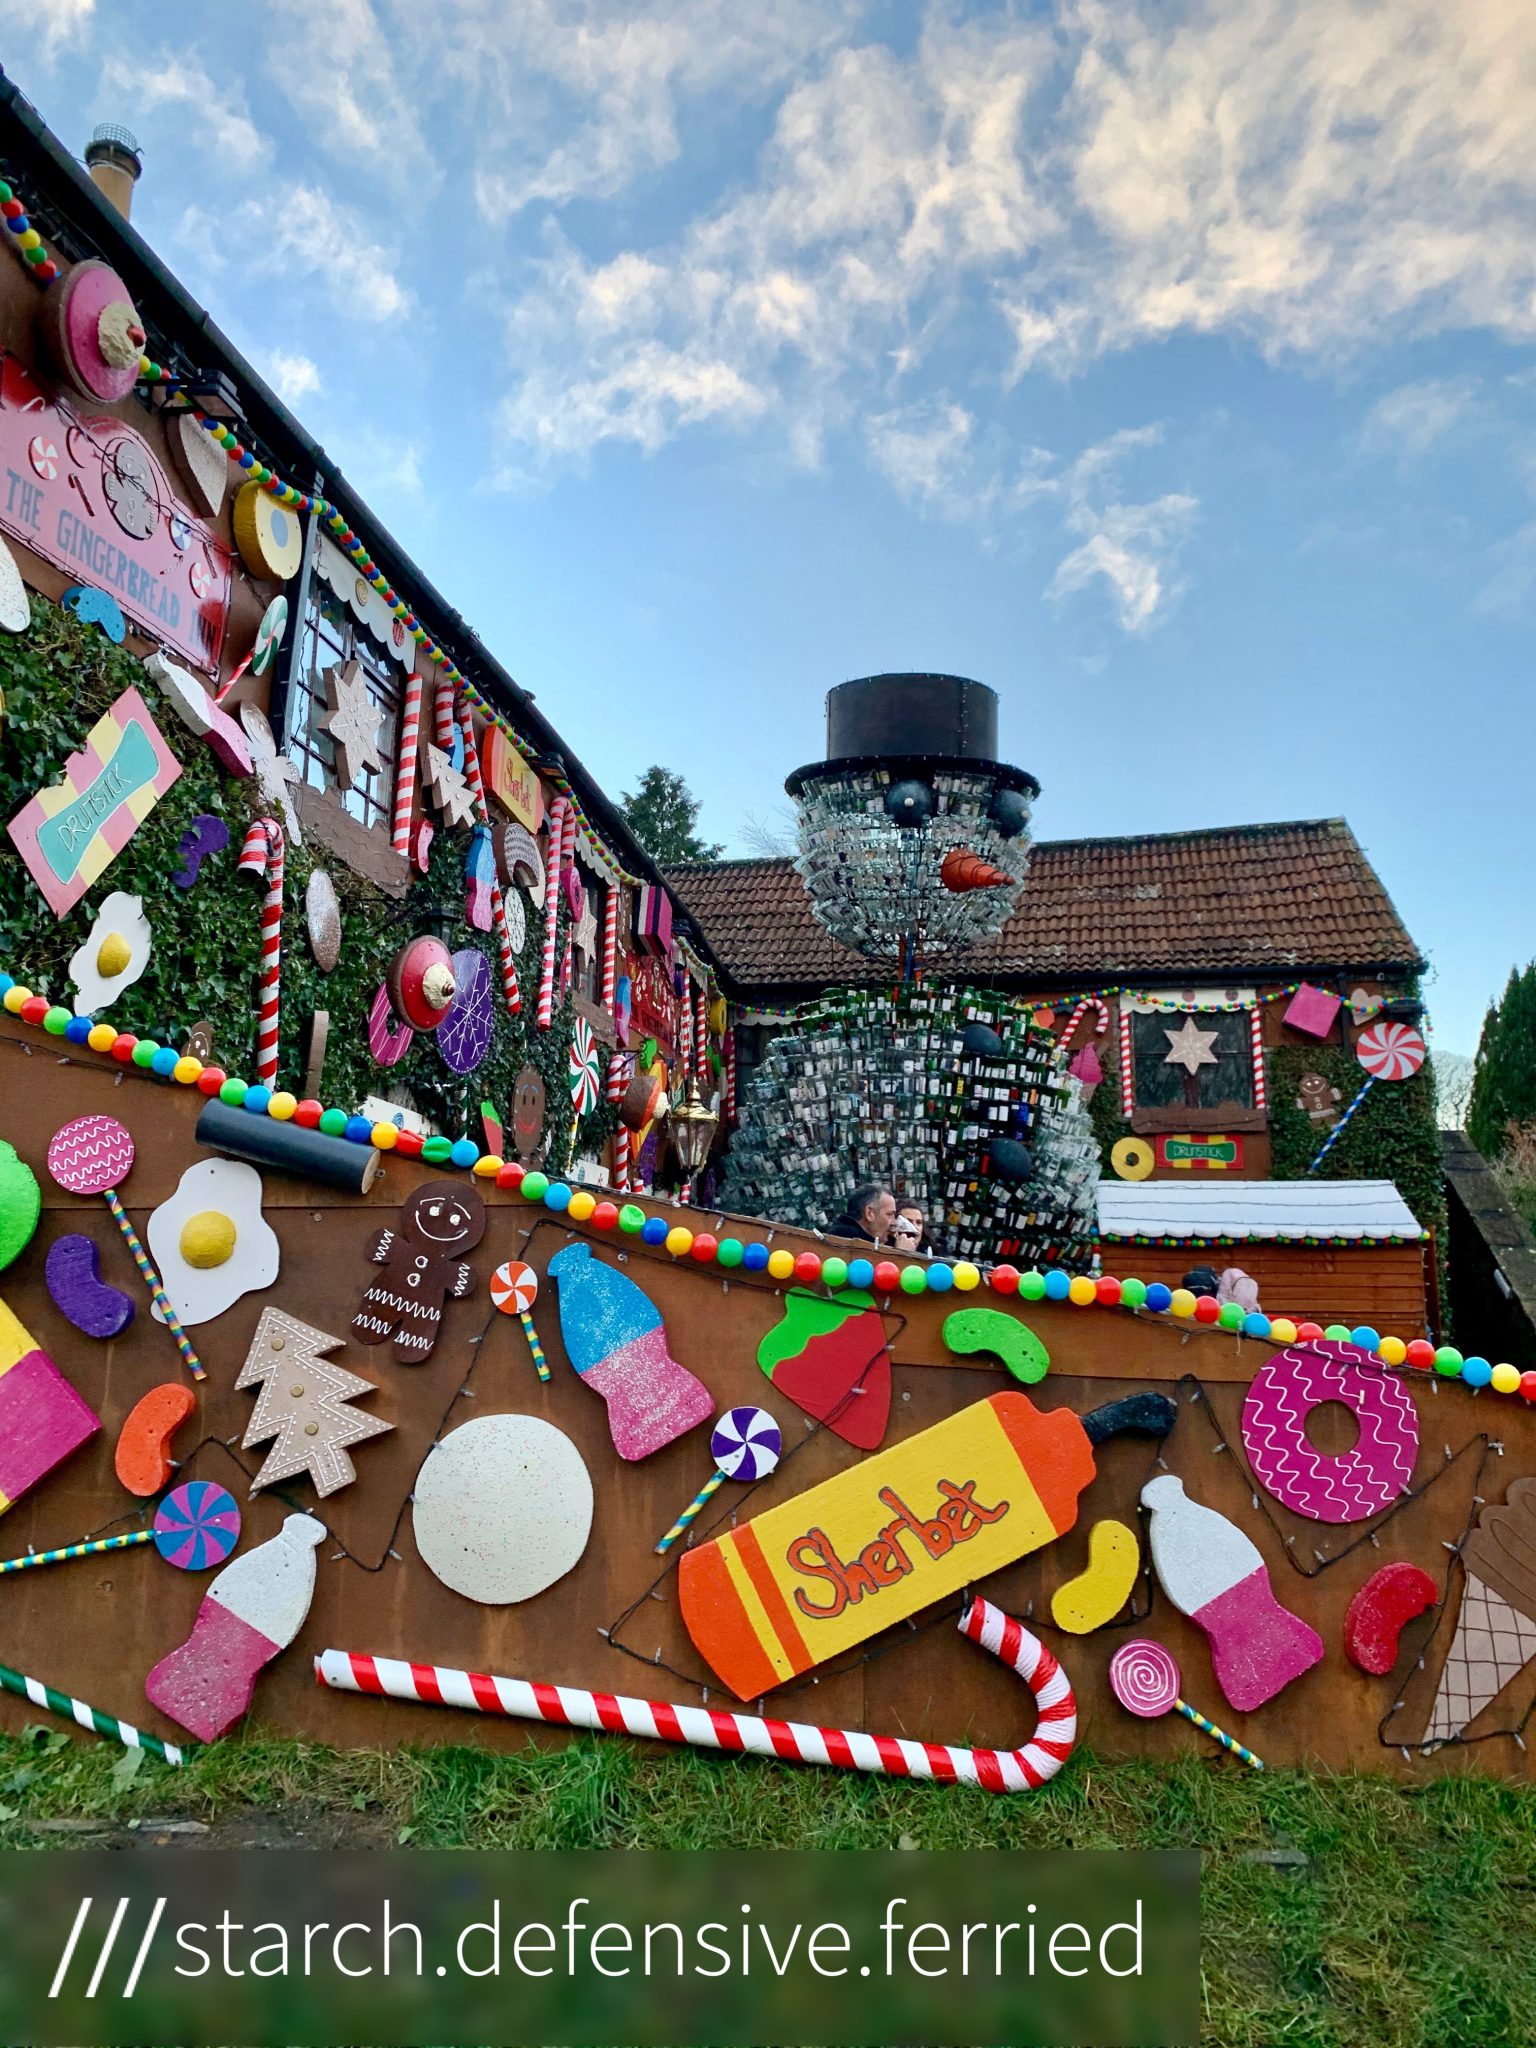 The Gingerbread Inn at Priddy, the glass bottle Snowman